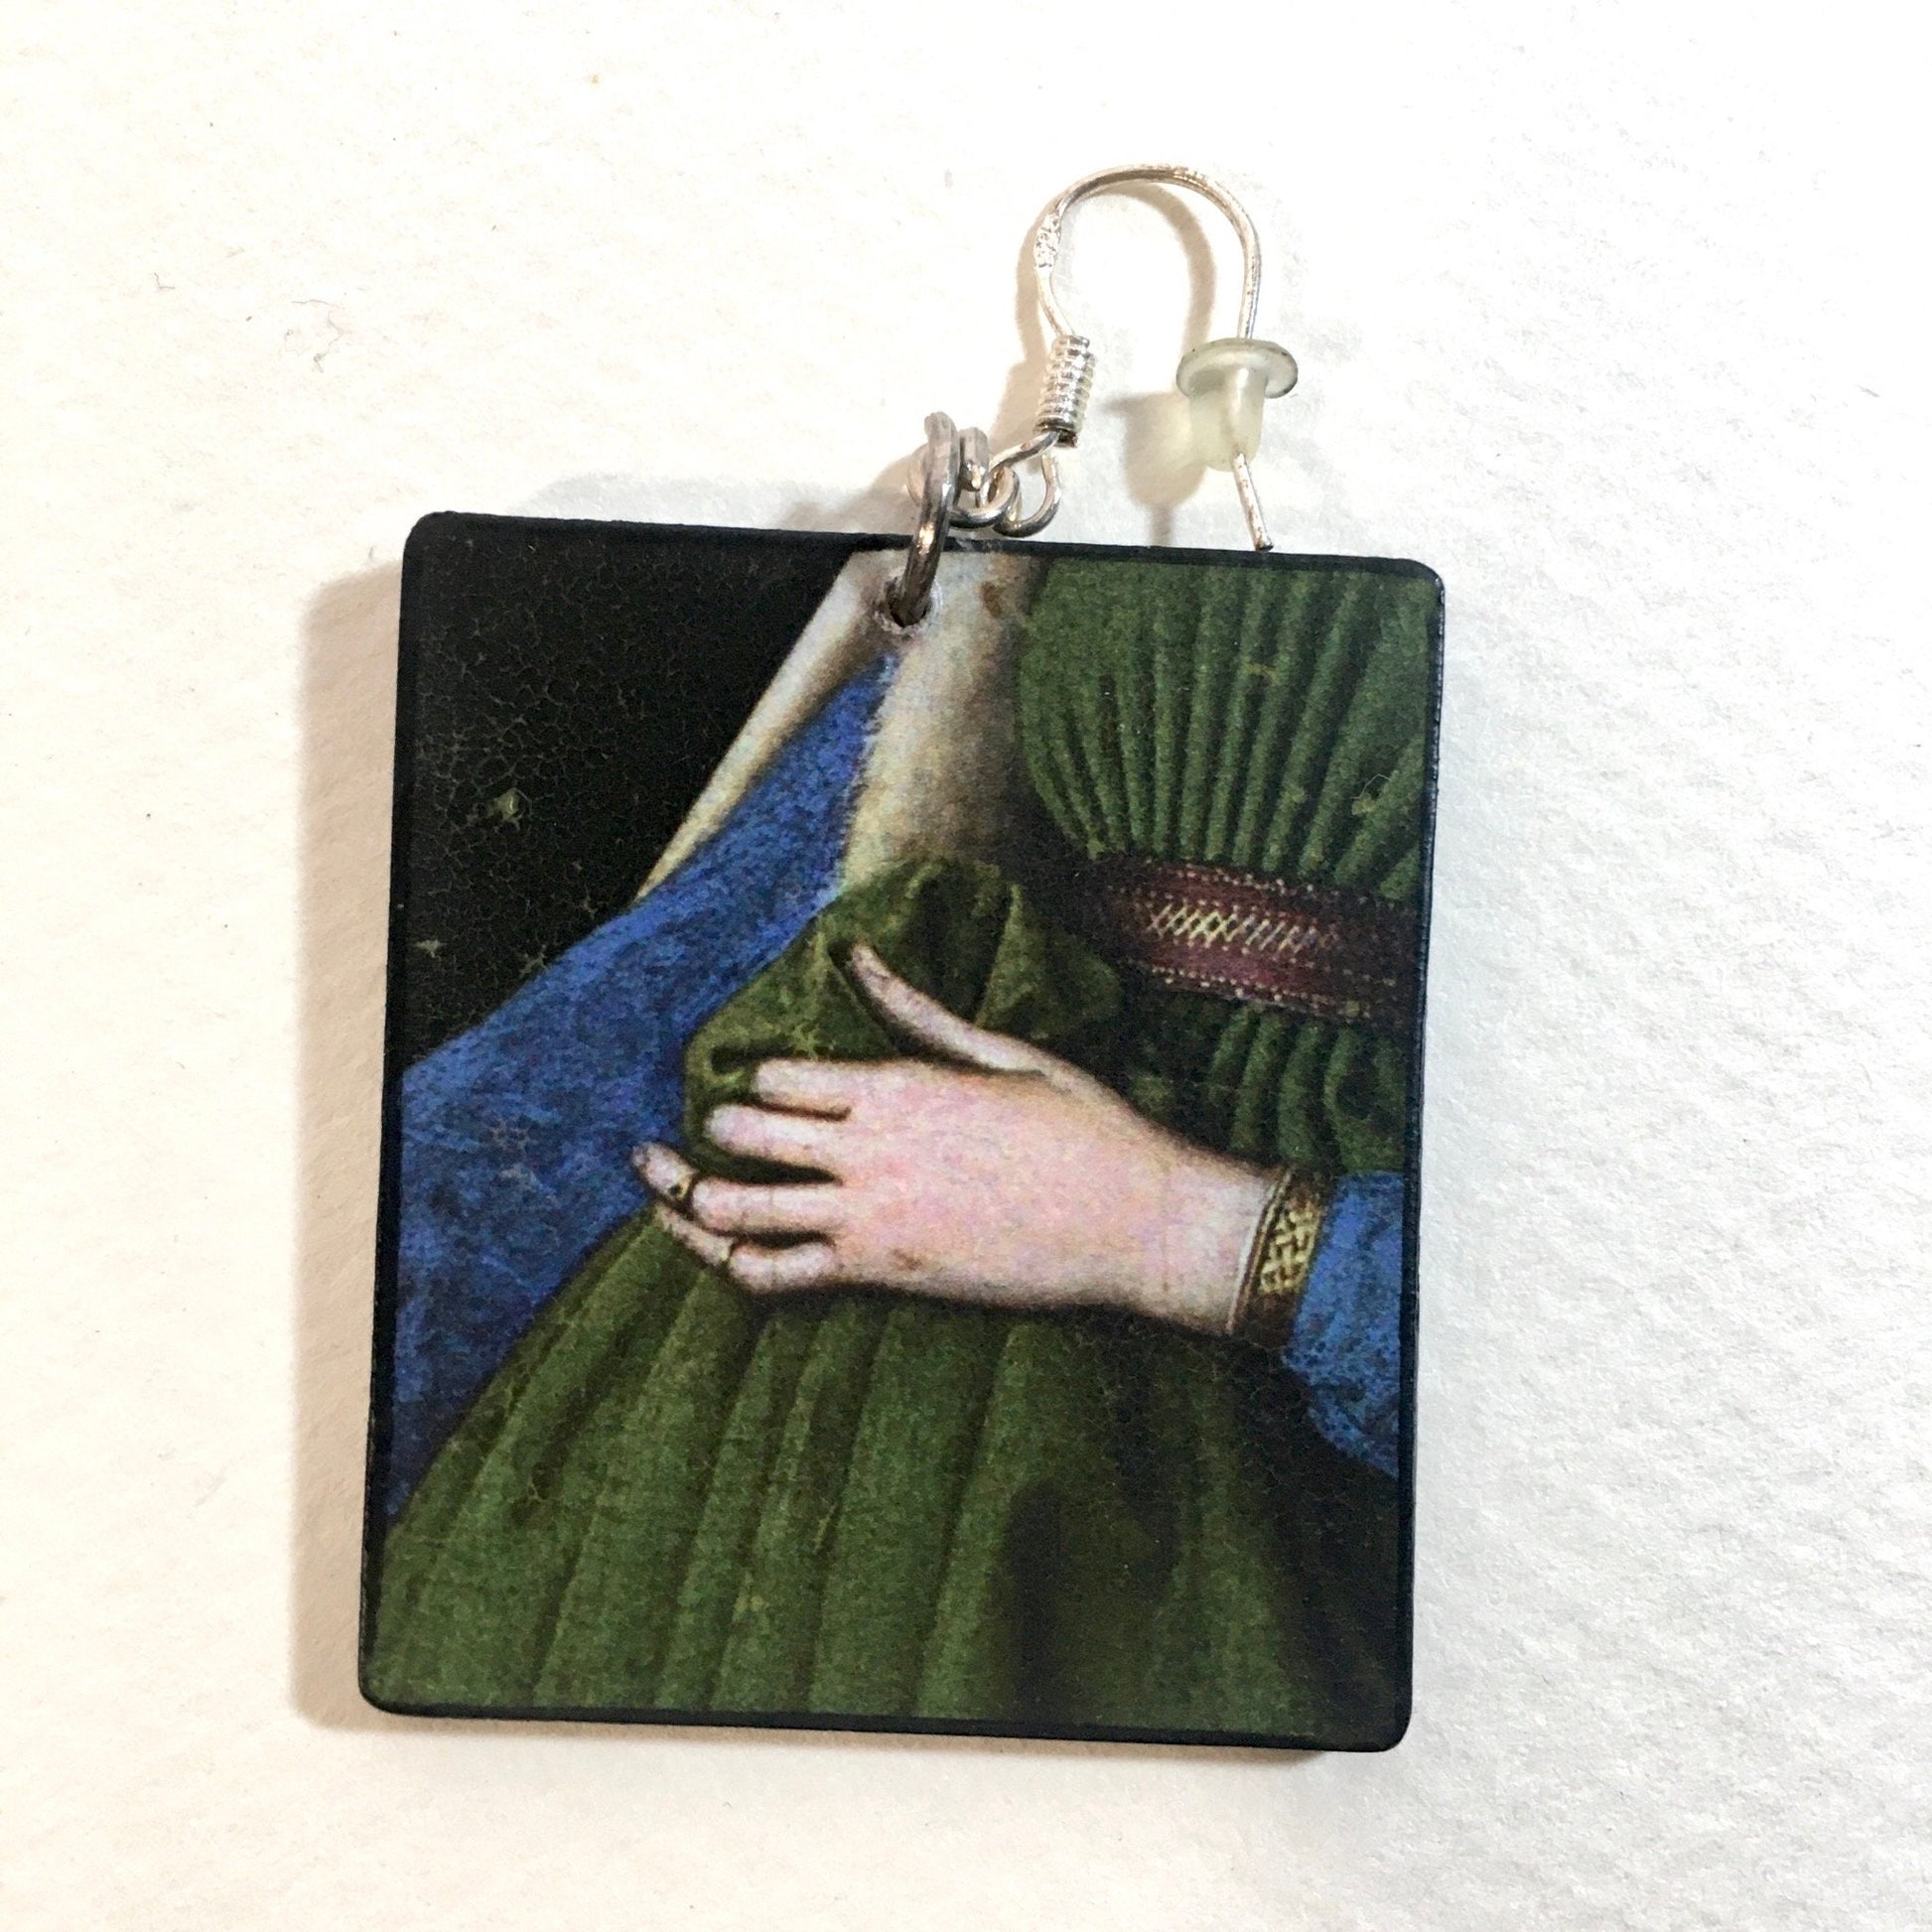 Mismatched art earrings professional handmade with sustainable wood and sterling silver hypoallergenic hooks. These earrings hecho the famous oil painting The Andolfini Wedding by Renaissance artist Jan van Eyck. 